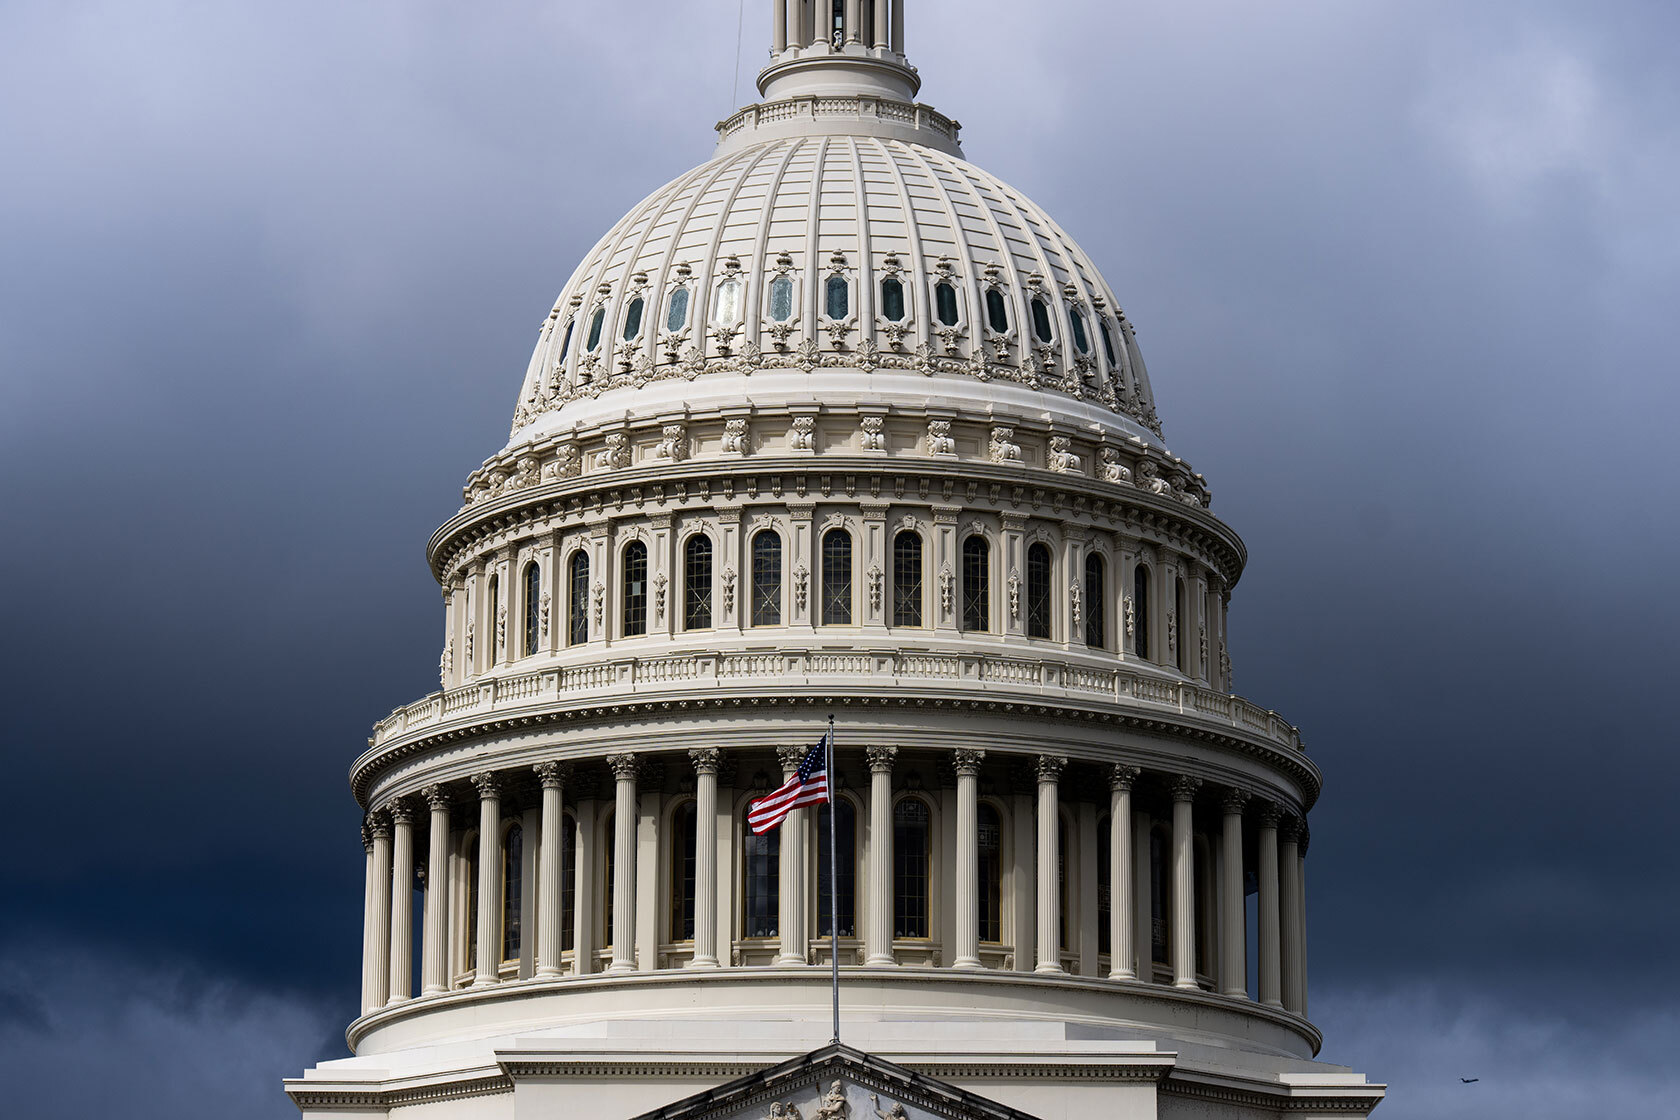 Dark clouds hang above the U.S. Capitol.